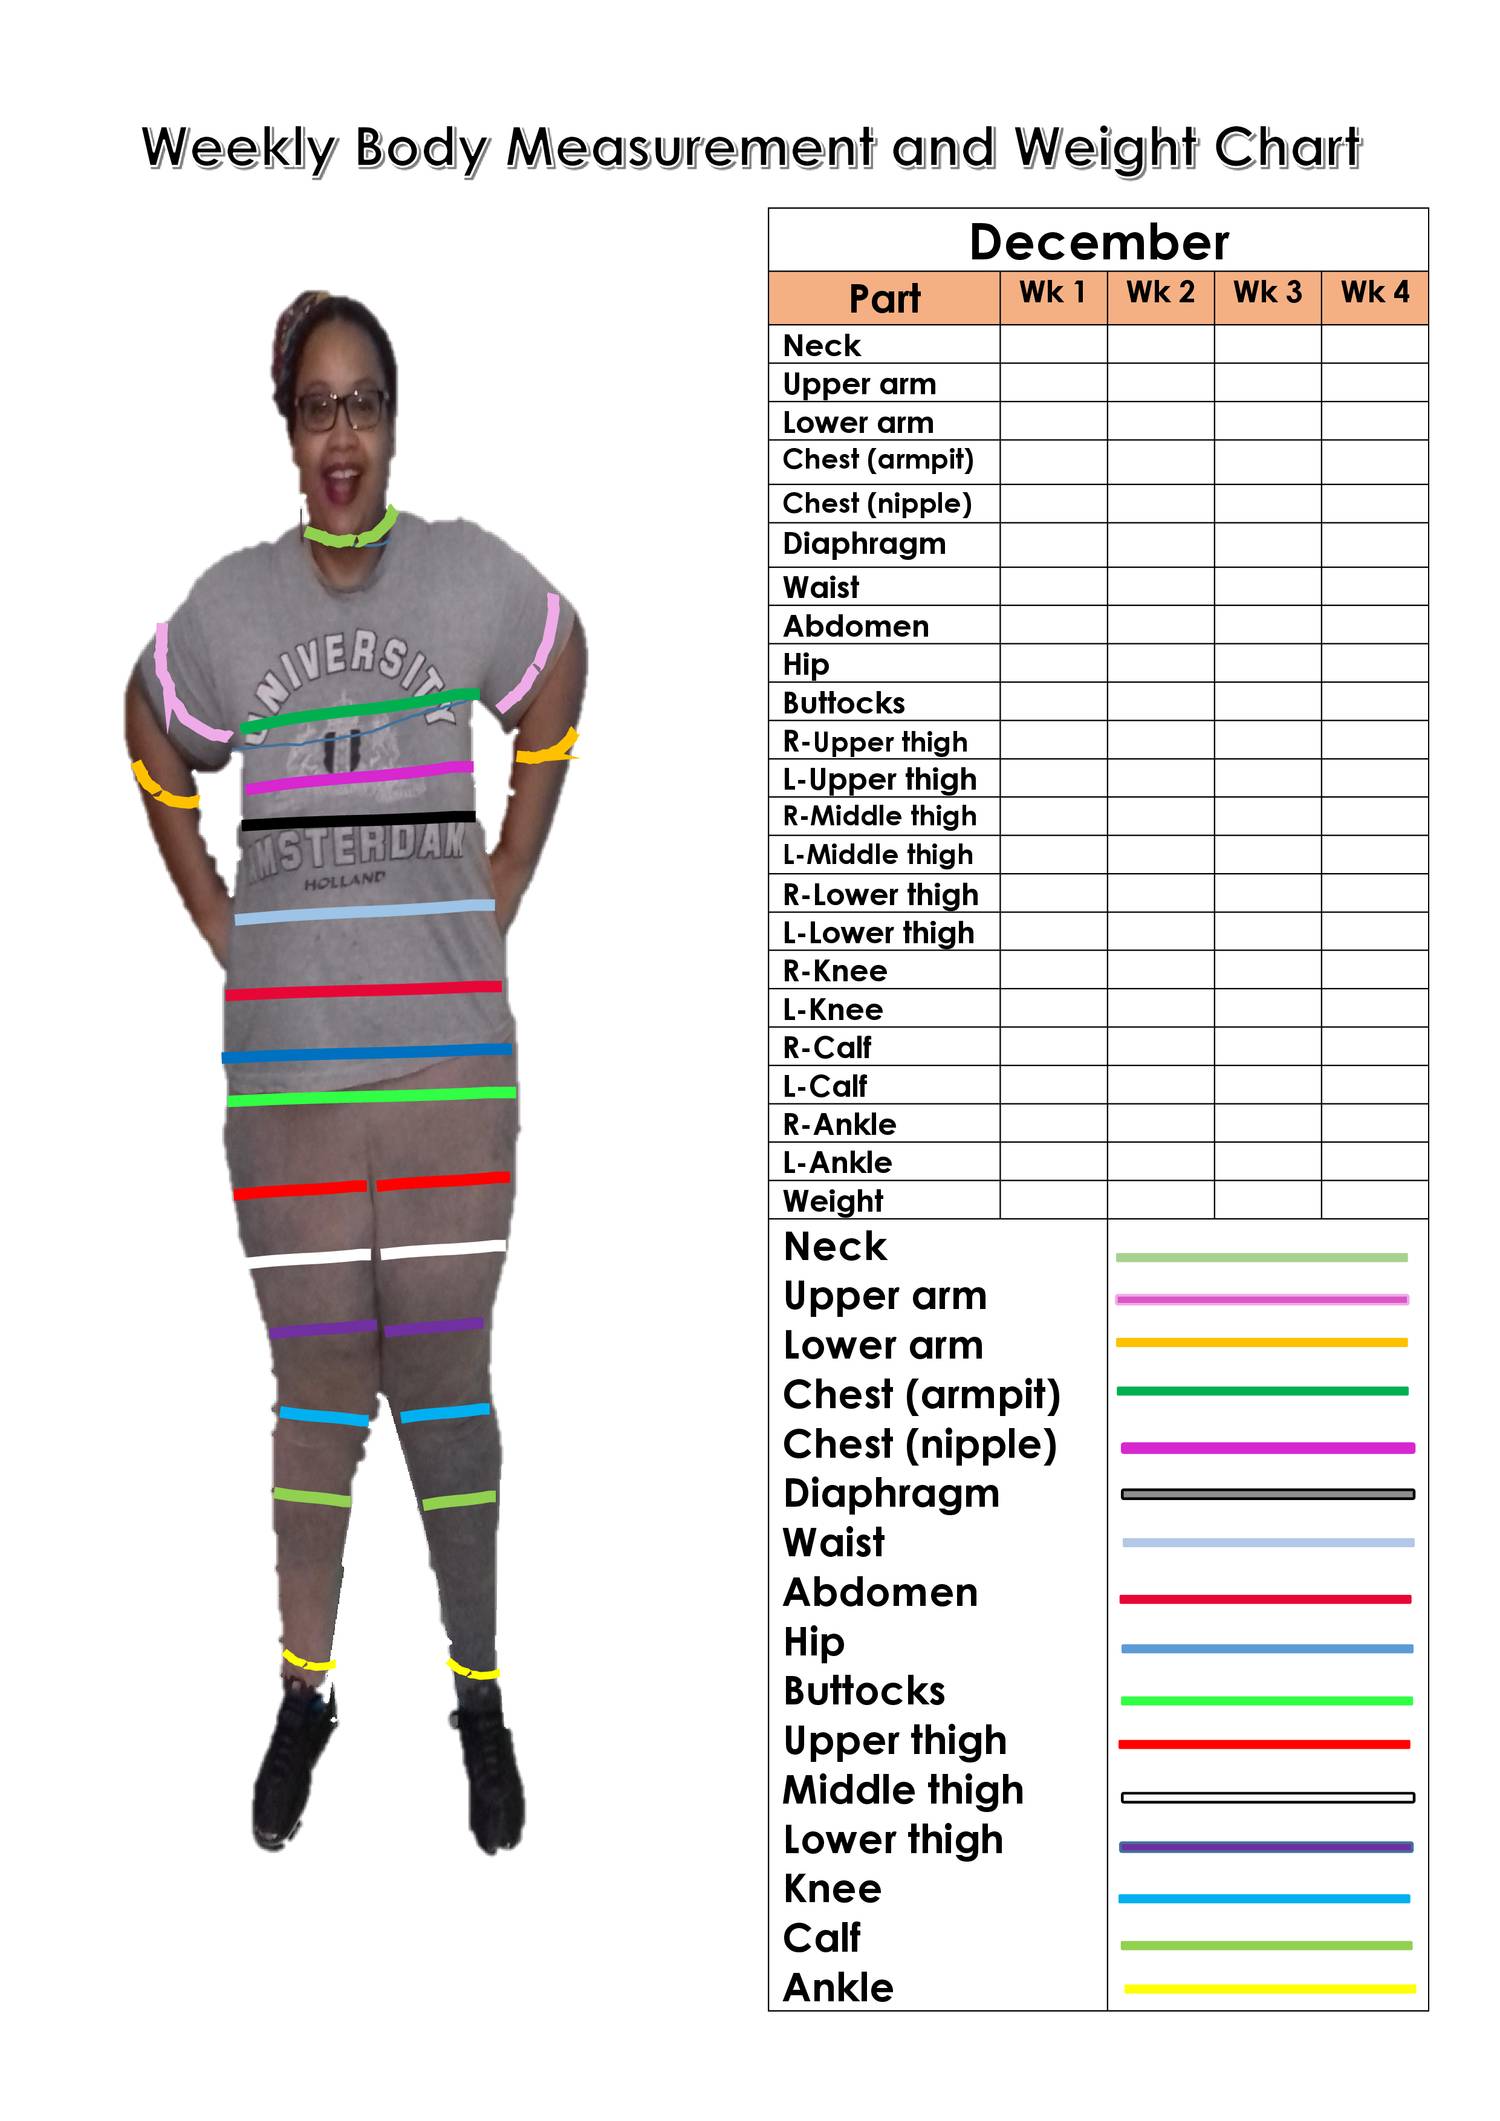 Weekly Body Measurement and Weight Chart A4.docx DocDroid